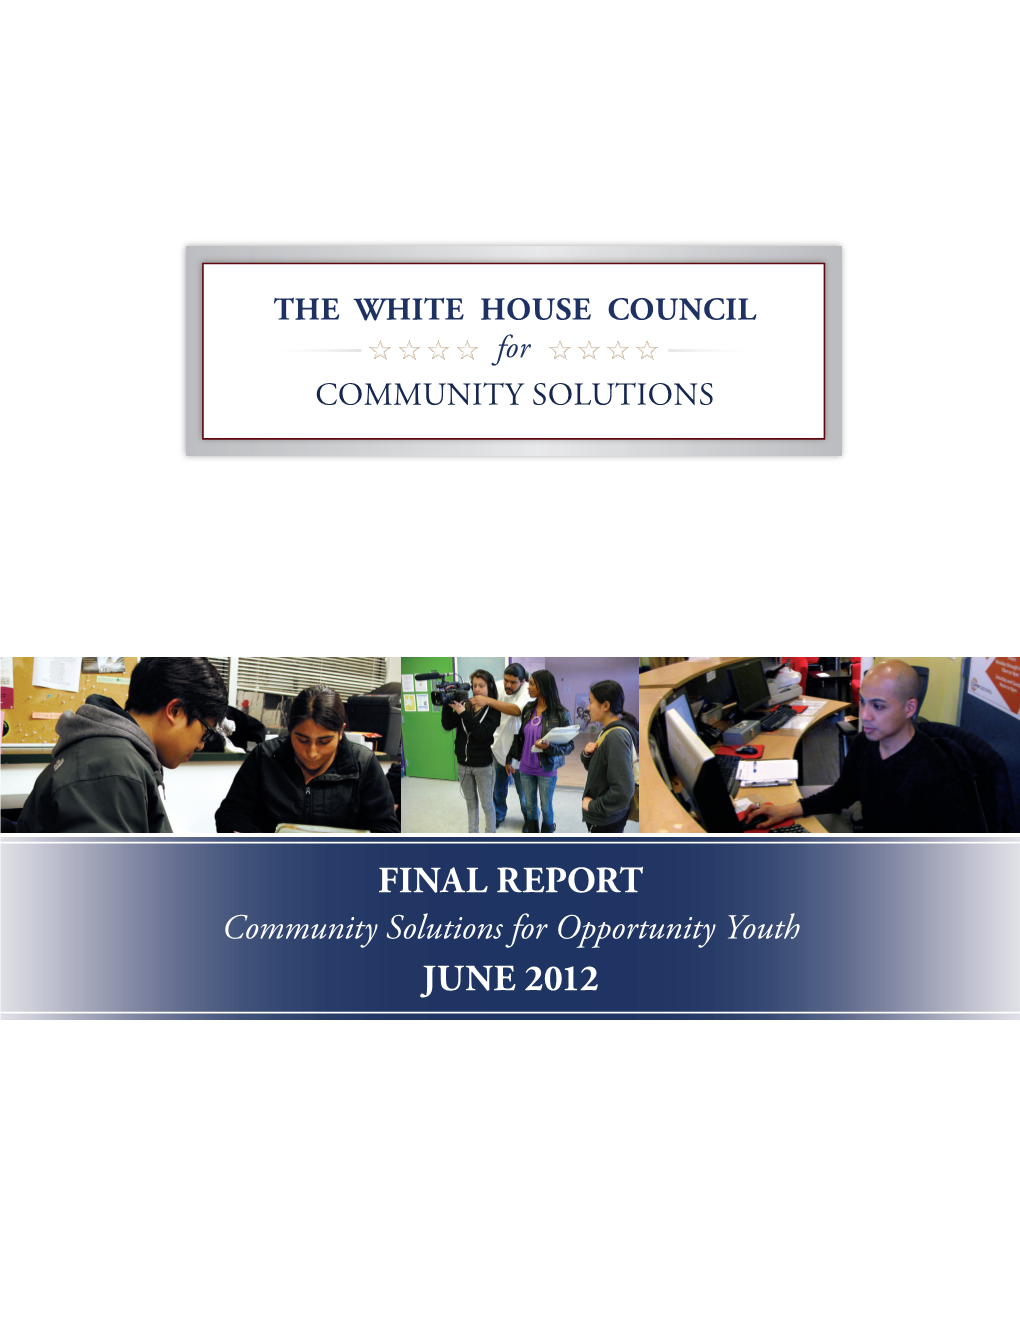 Final Report: Community Solutions for Opportunity Youth